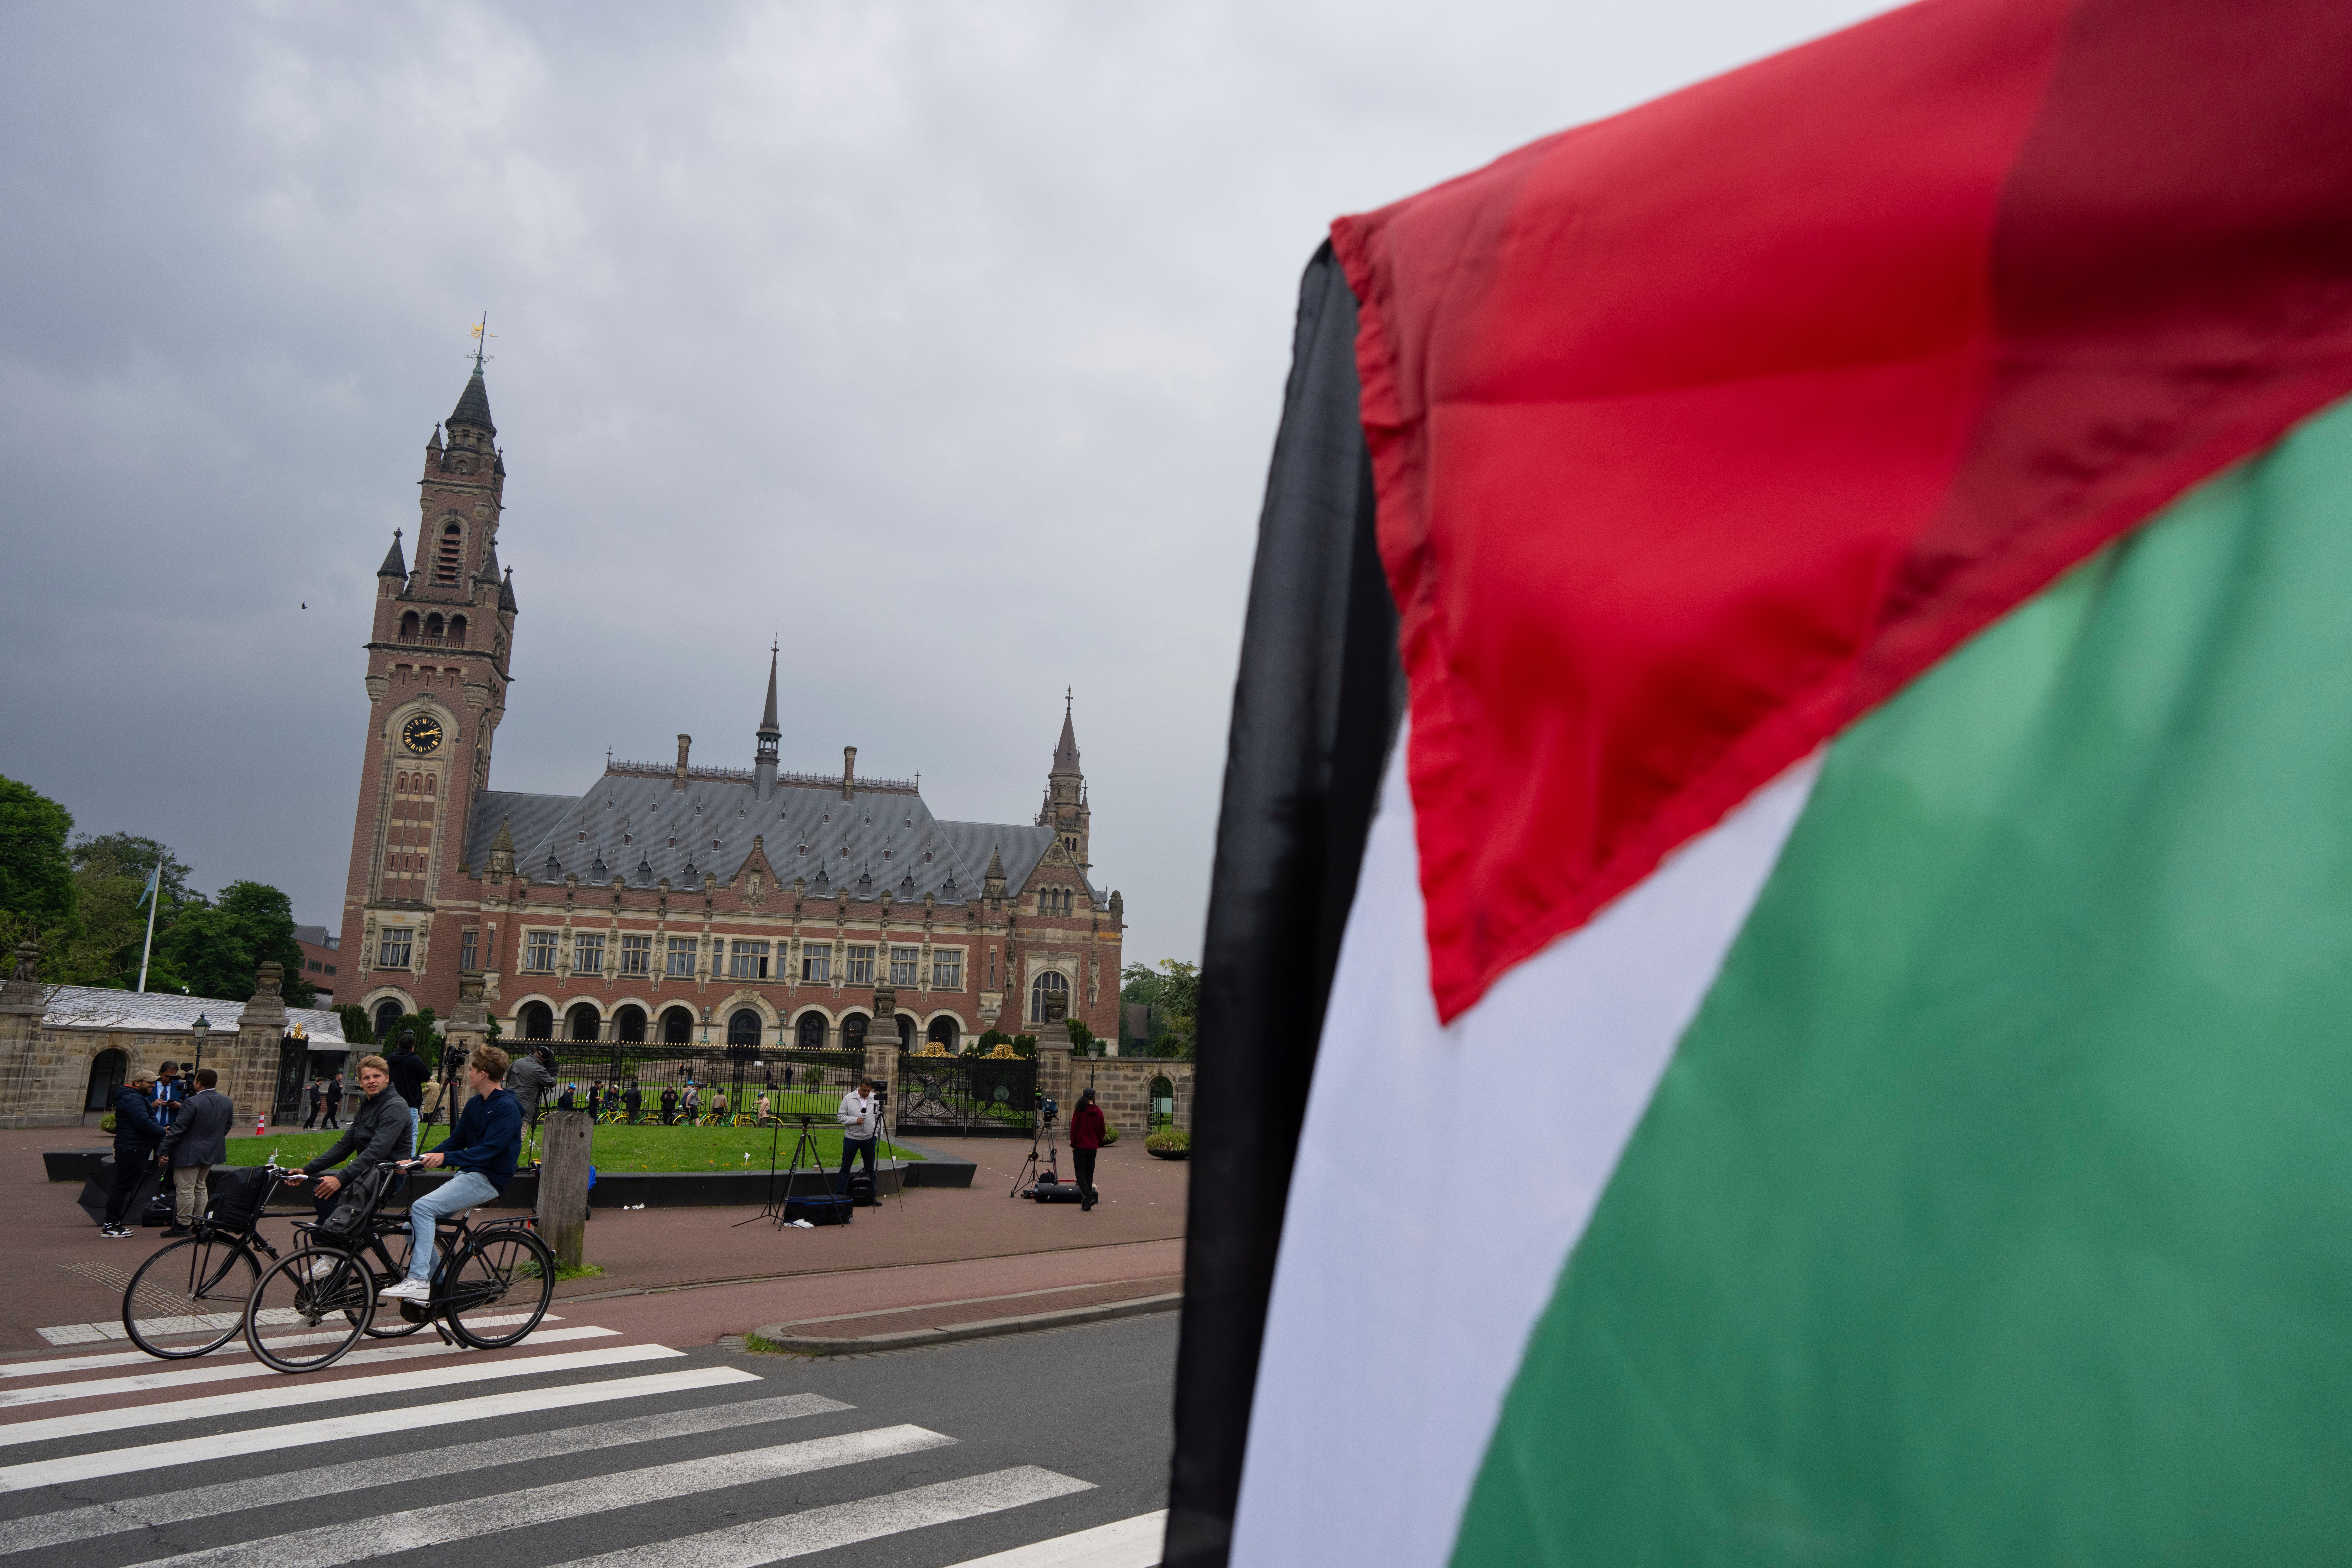 The court at The Hague, with demonstrators carrying Palestinian flags